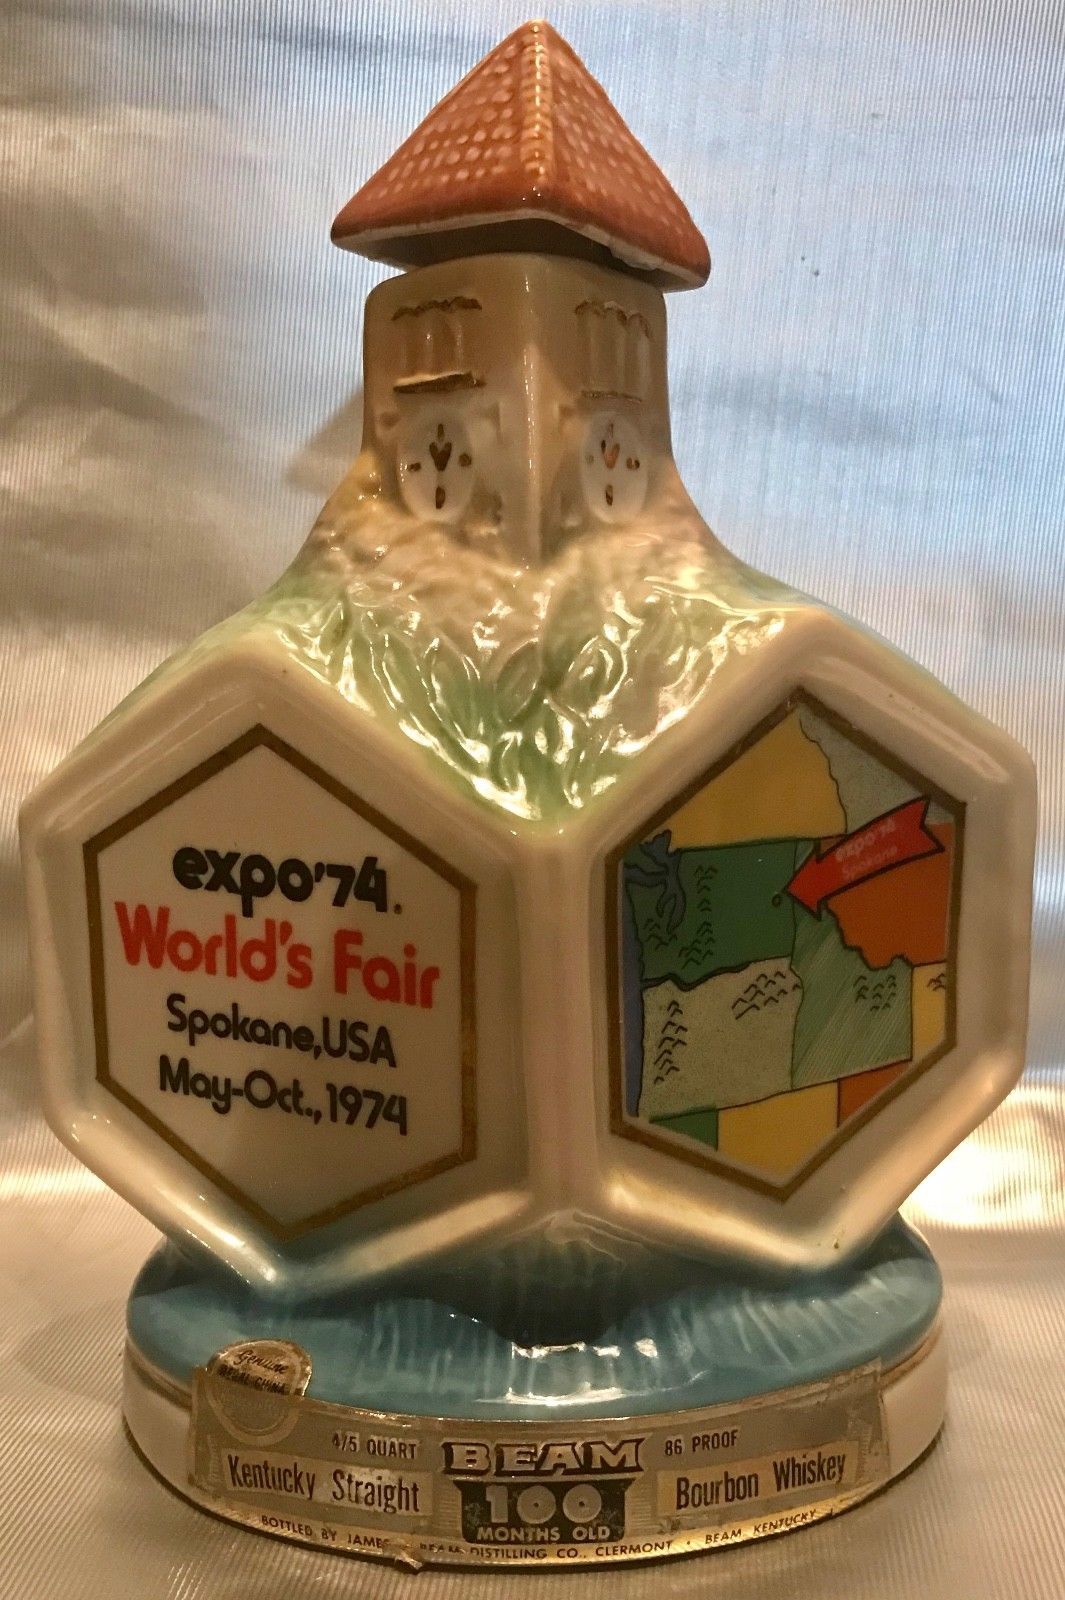 Primary image for Jim Beam WORLD'S FAIR EXPO 74 100 Month Old Whiskey Decanter - Spokane WA 1974